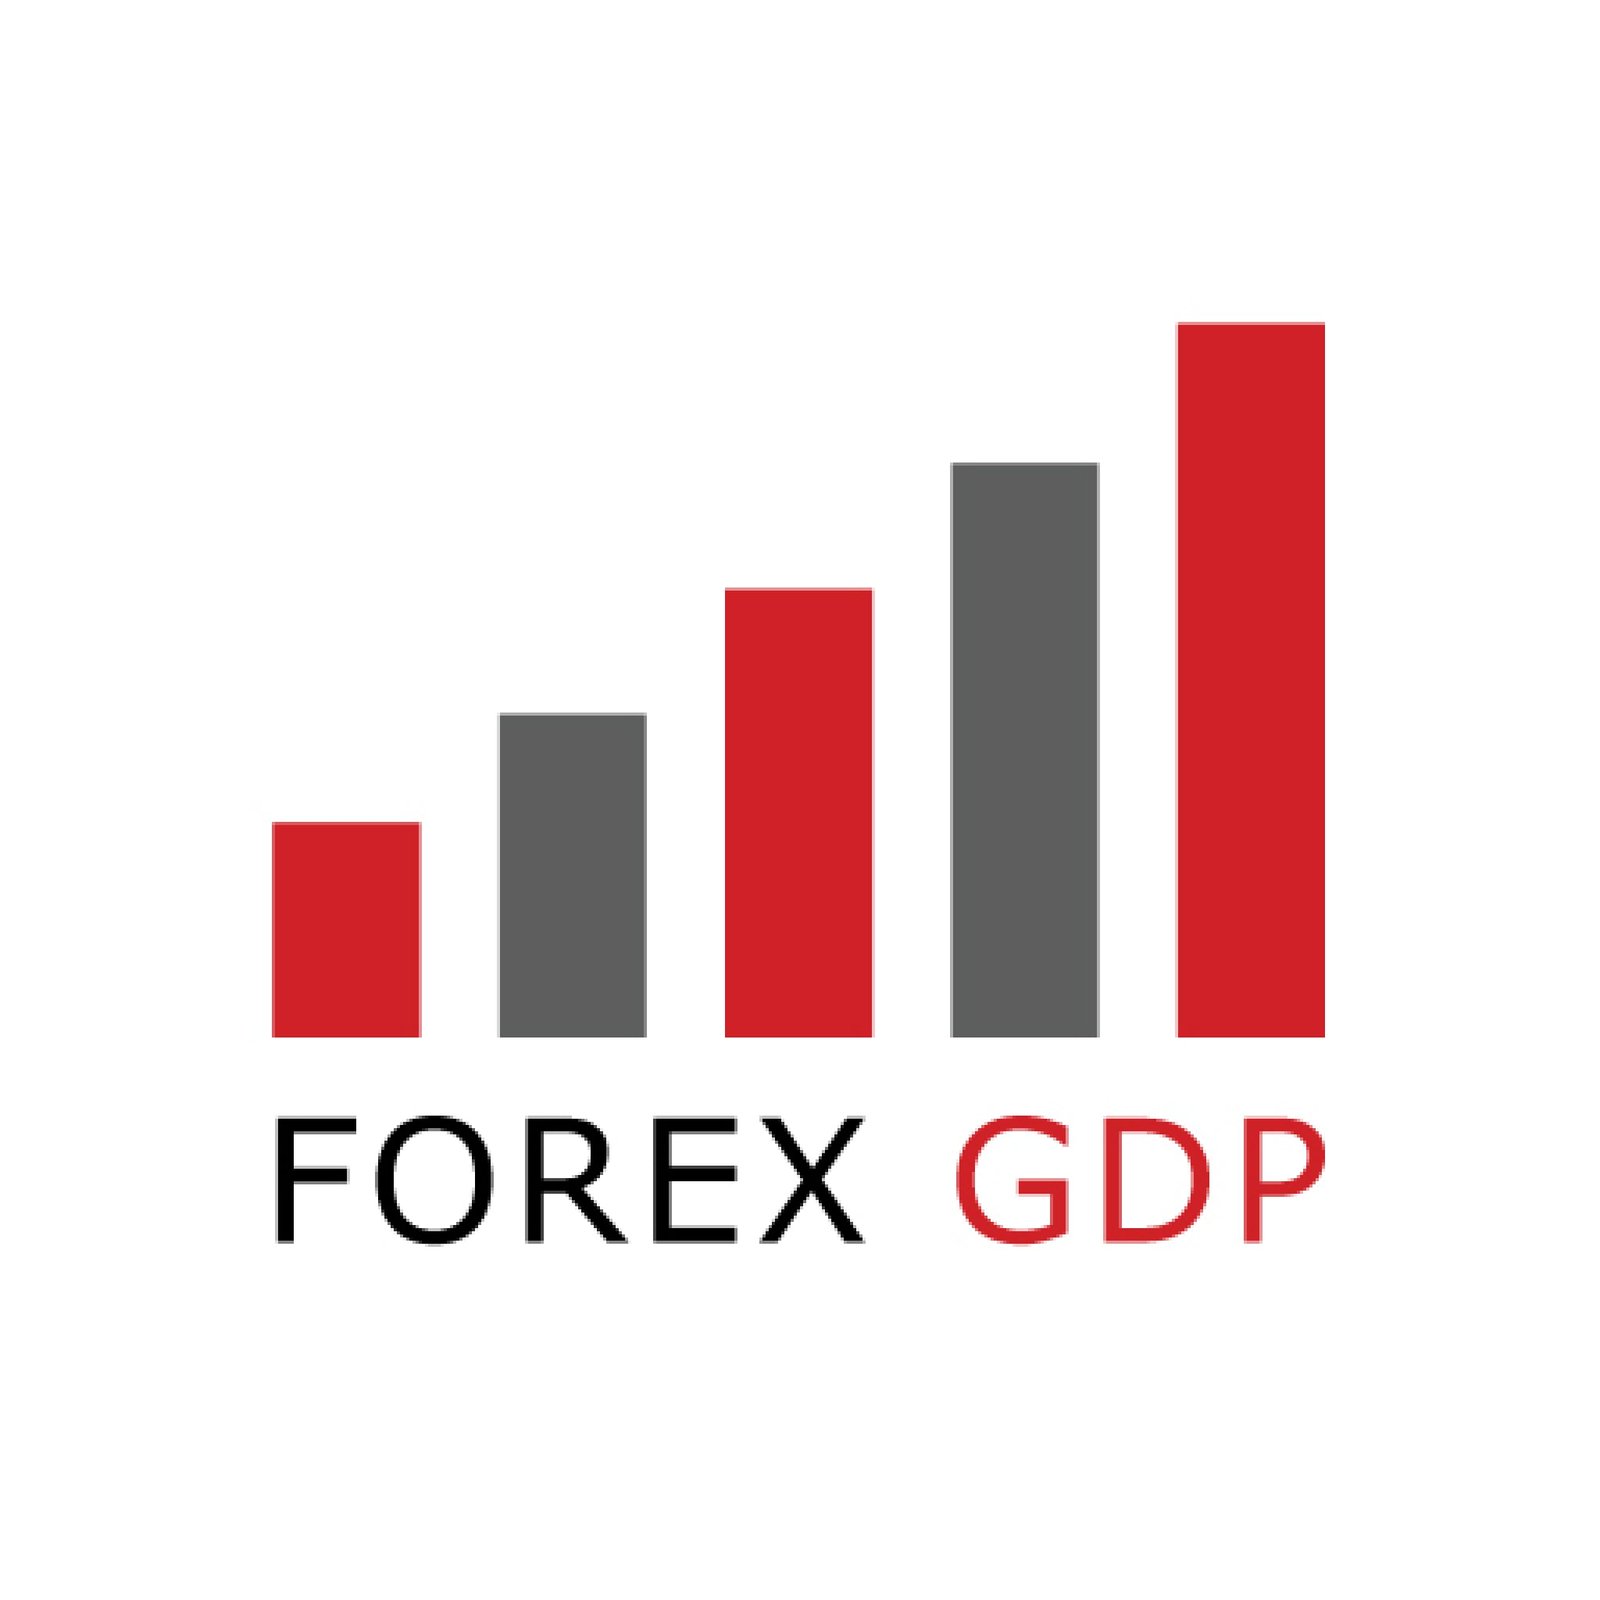 Trusted Forex Reviews » Forex GDP Signals - Review ...